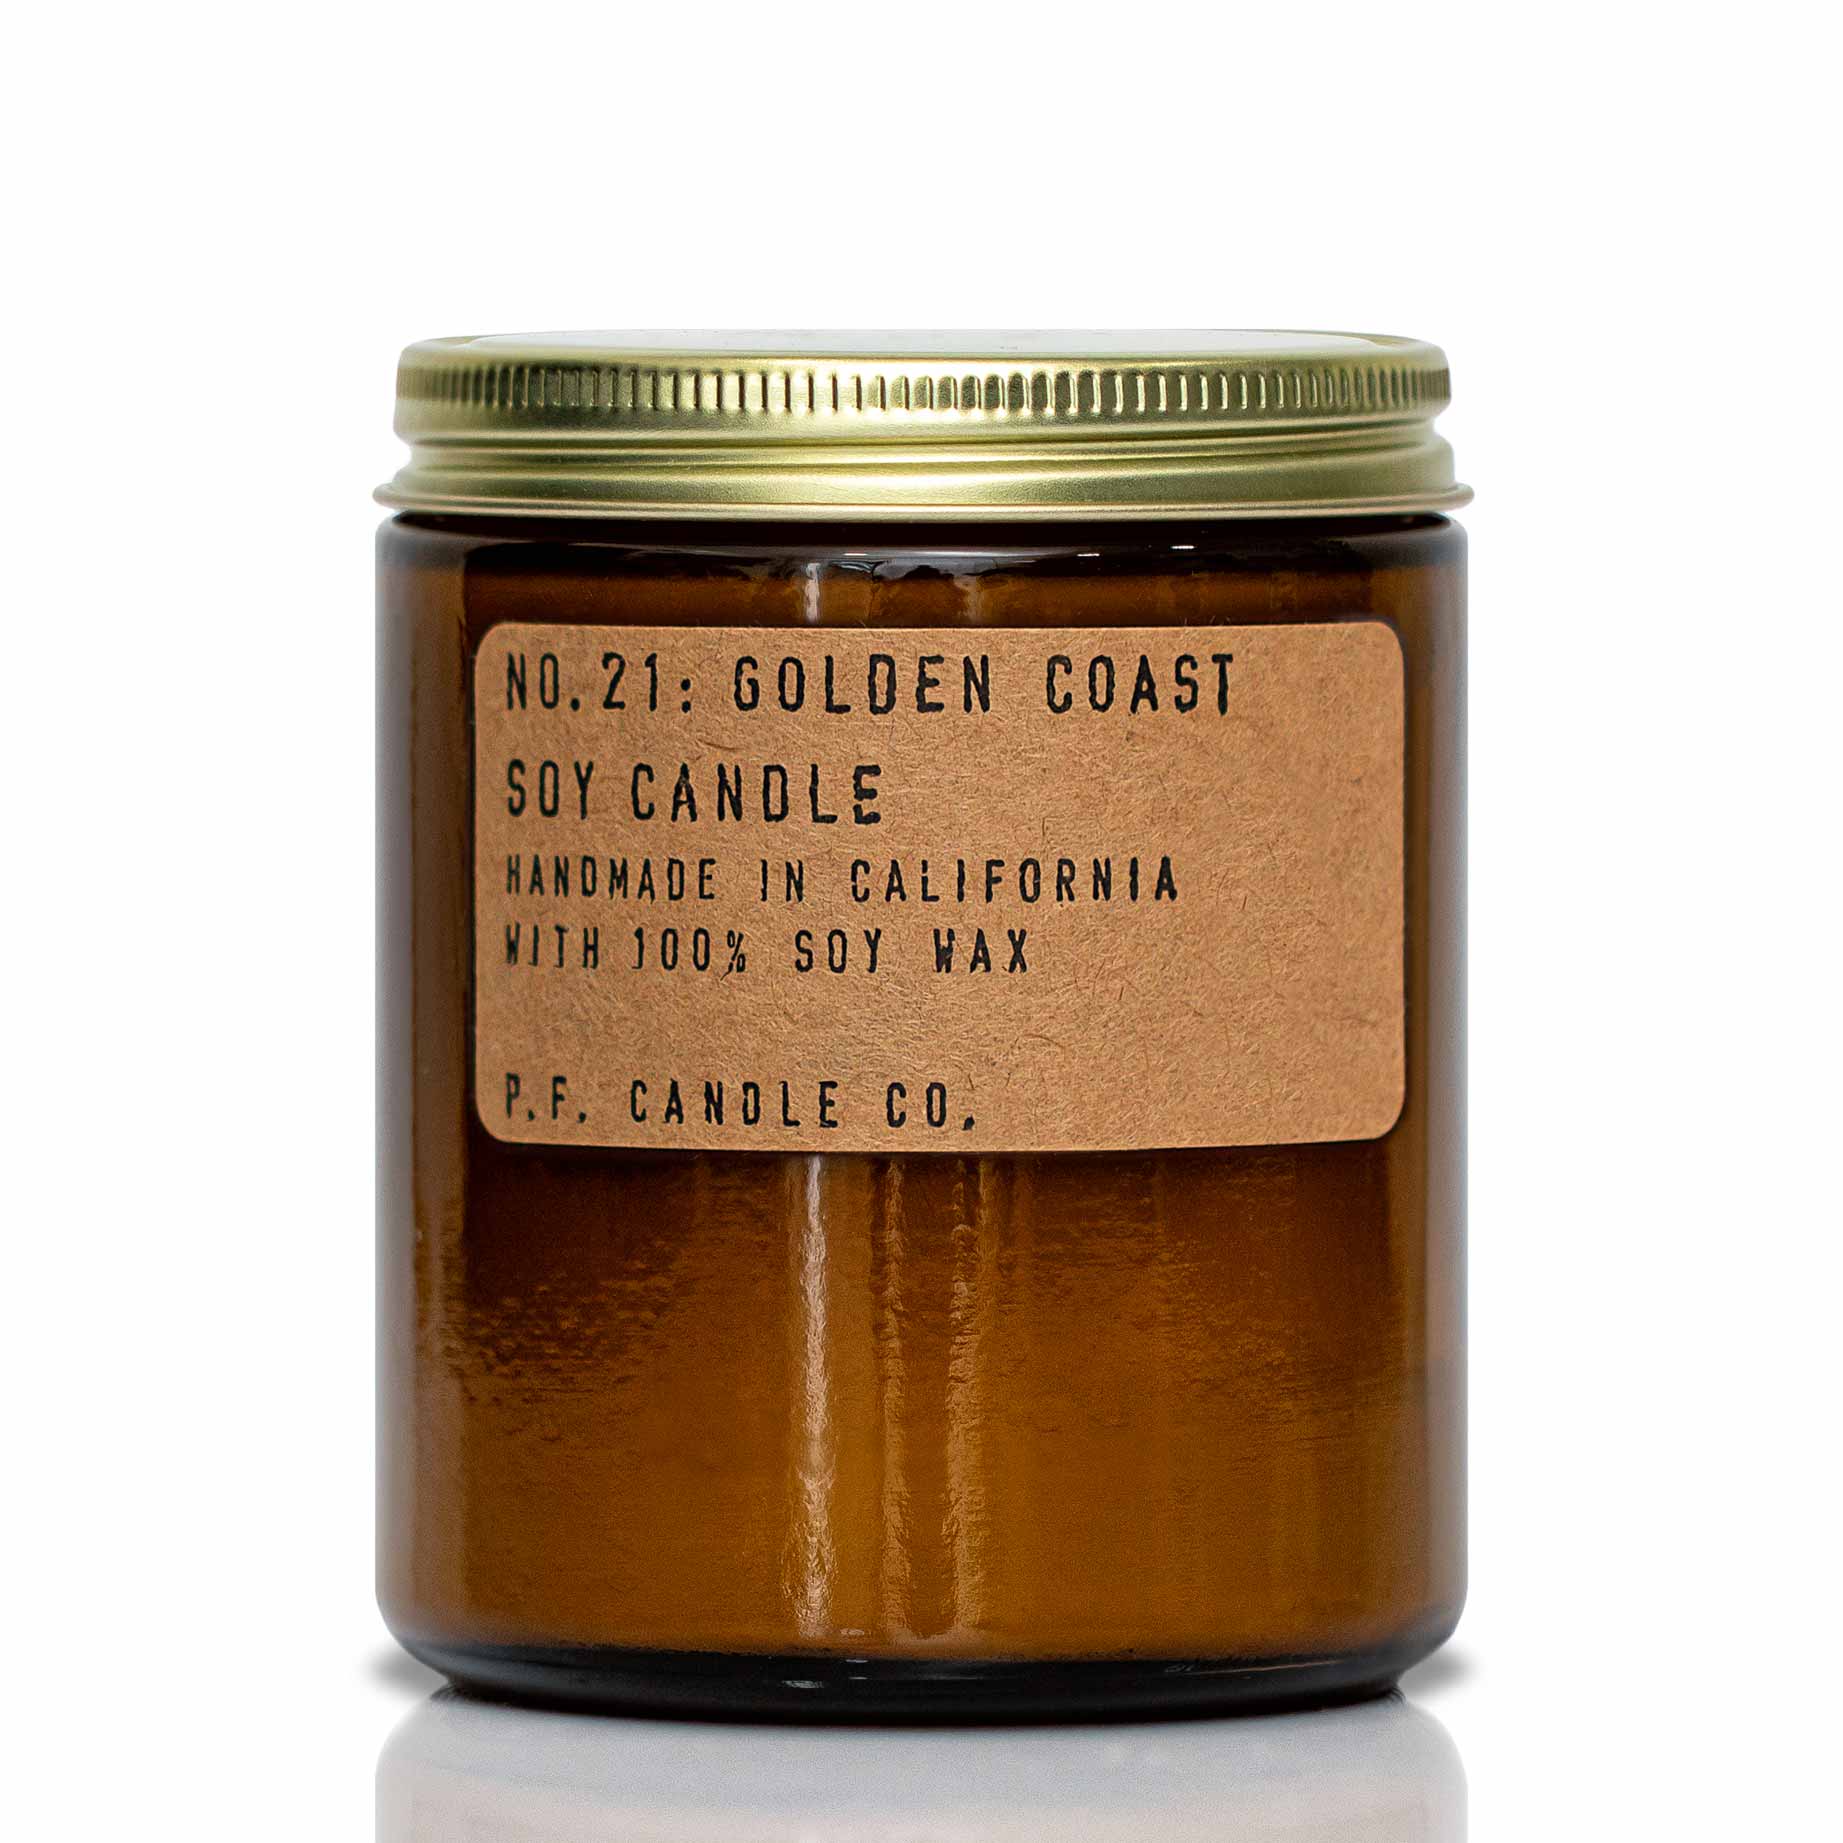 P.F. Candle Co. Golden Coast Handmade Soy Candle, Brown - 7.2 oz jar